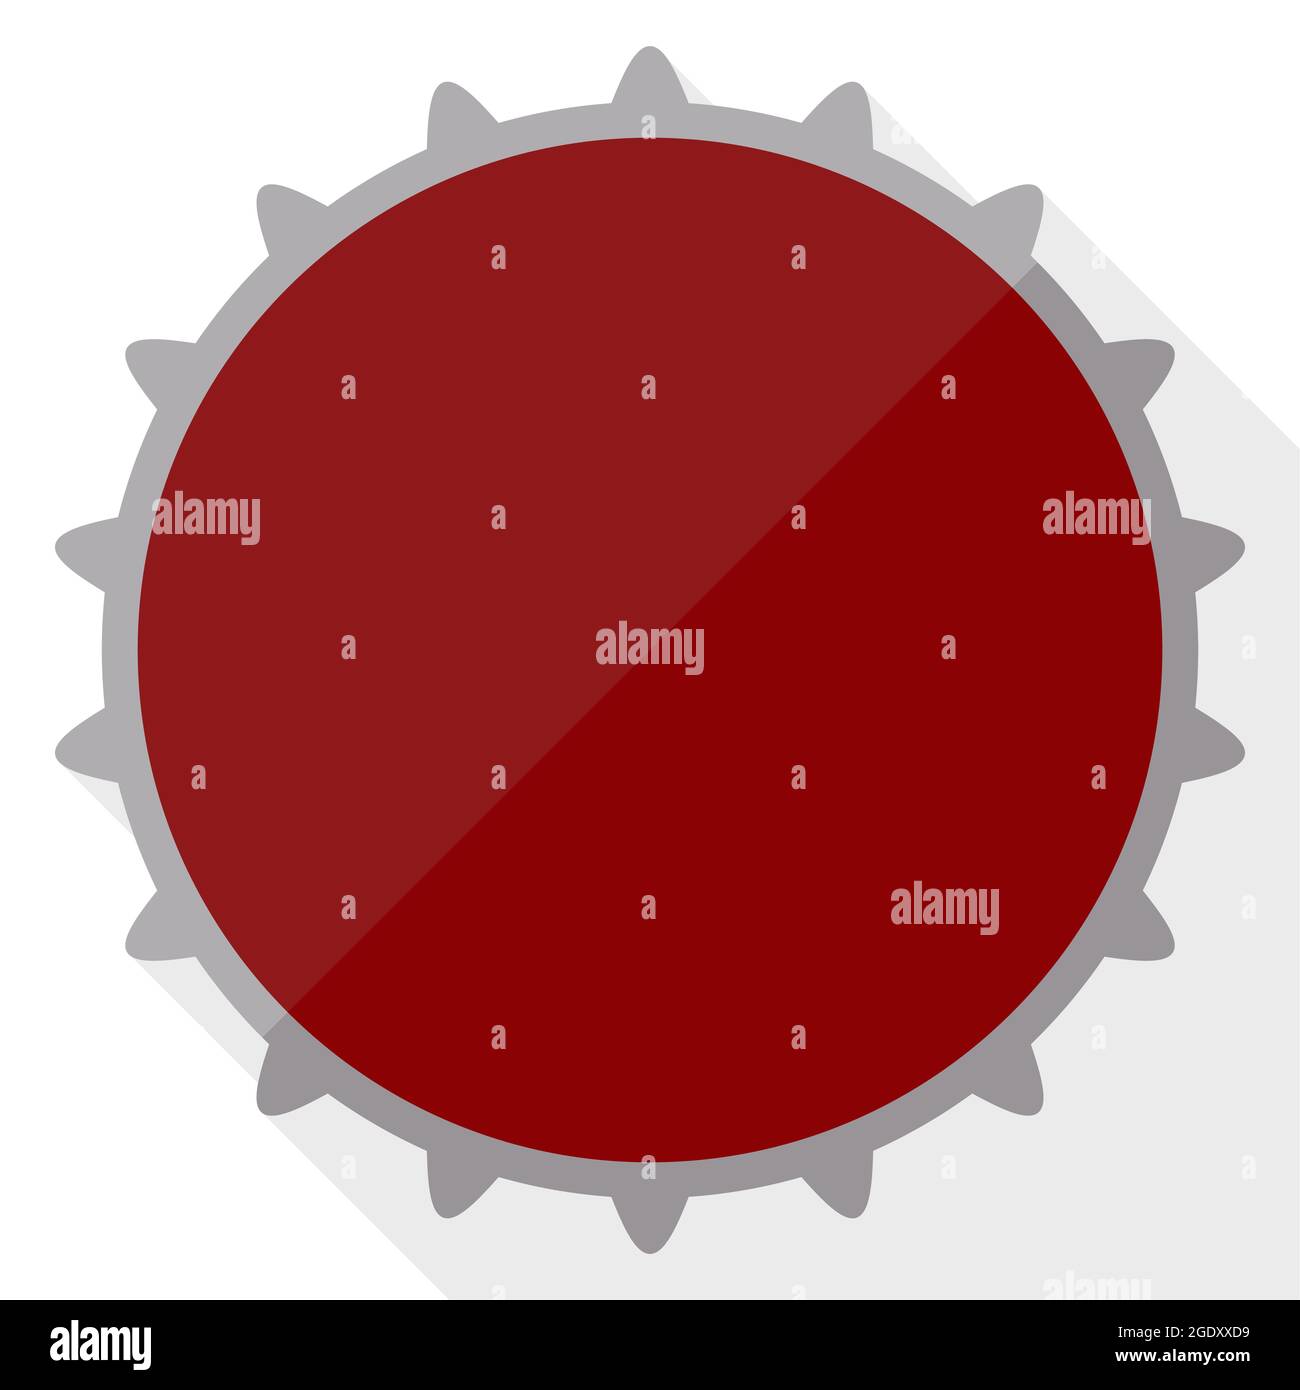 Top view of a red and metallic crown cork or bottle cap in flat style and long shadow. Stock Vector